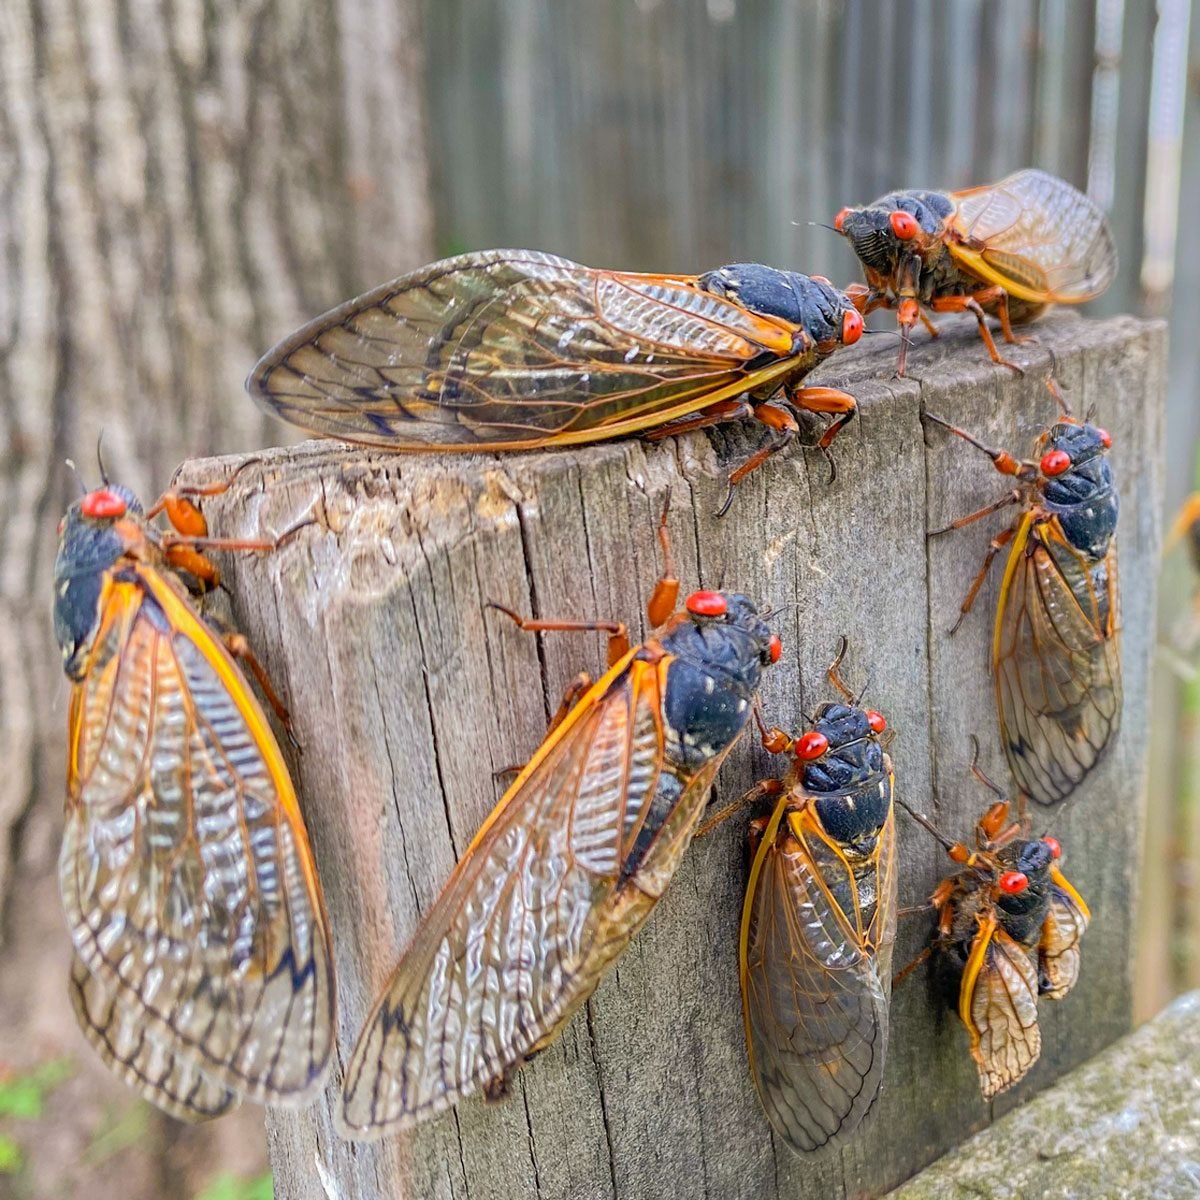 How To Keep Cicadas From Taking Over Your Home